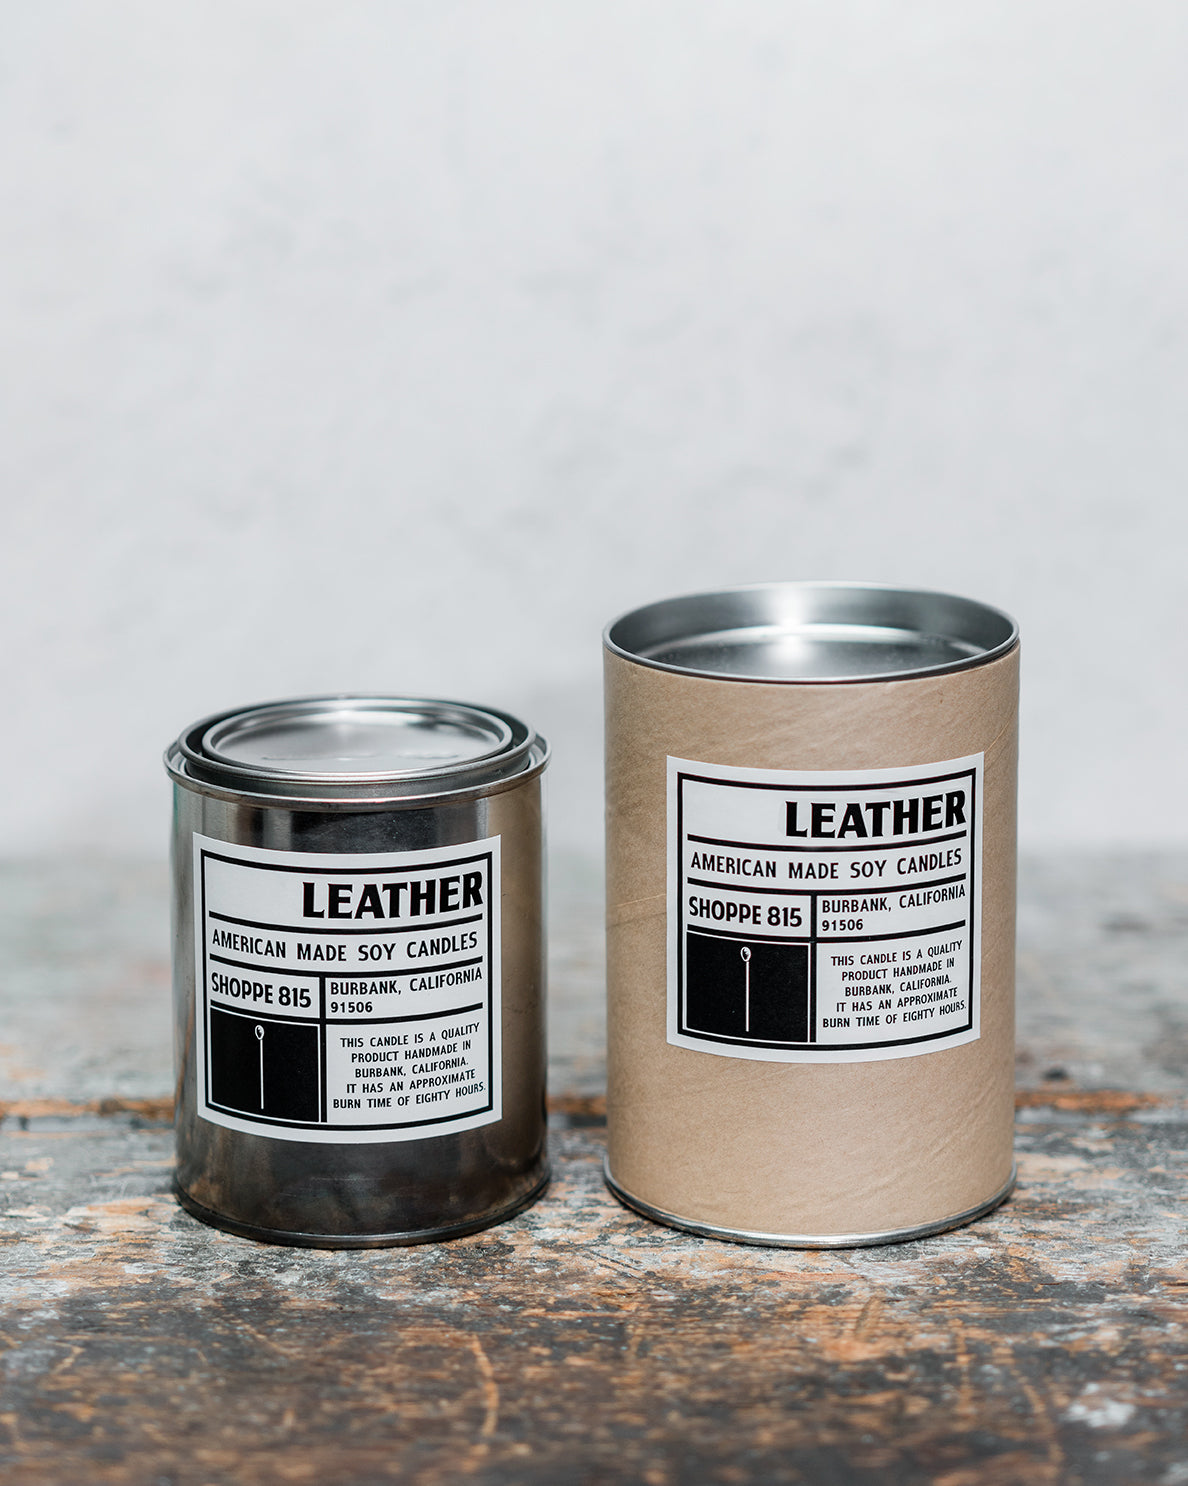 Leather gender neutral tin candle on wooden shelf with packaging